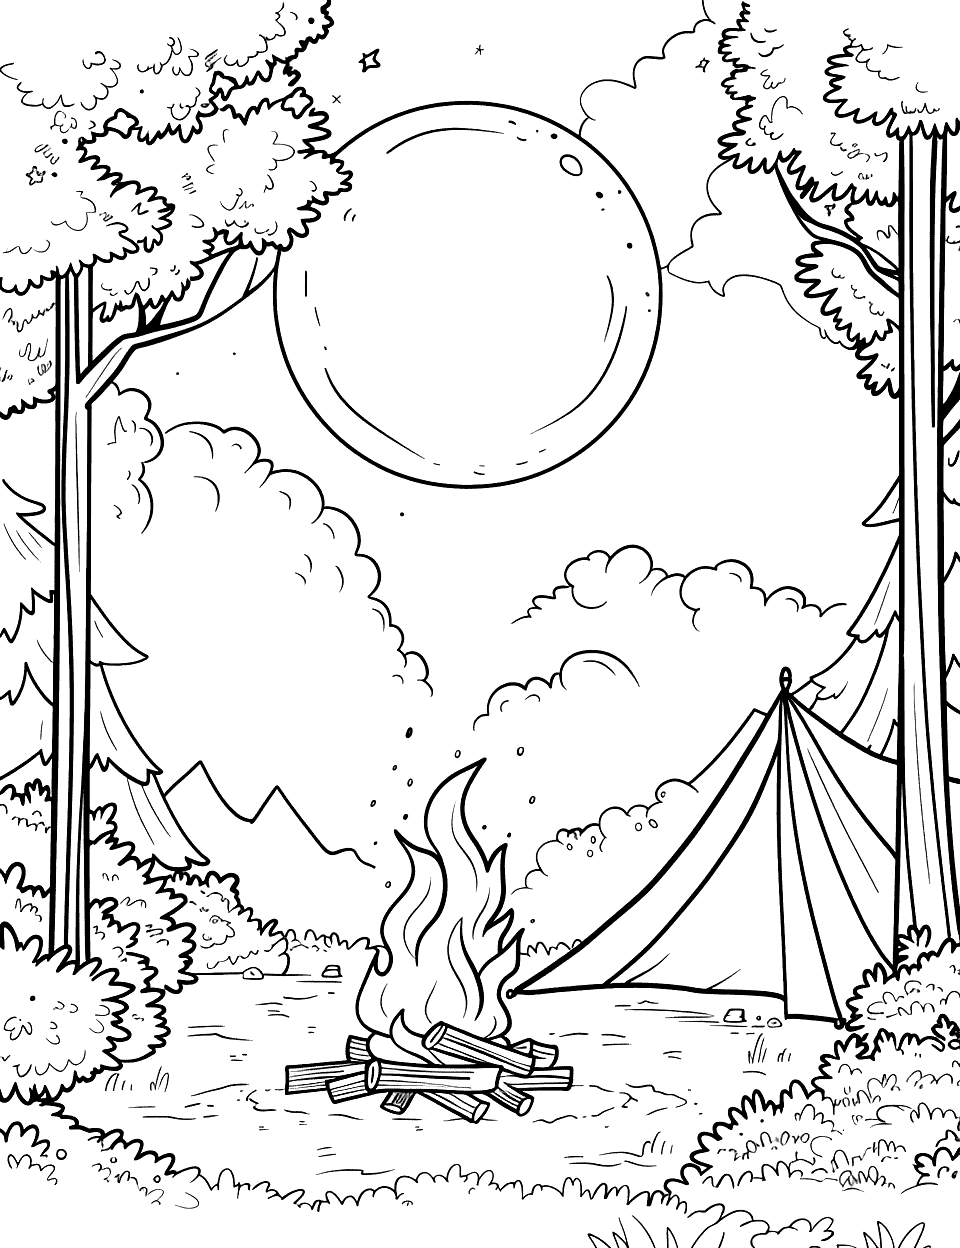 Moonlit Campfire Scene Camping Coloring Page - A campfire under a full moon, with a tent in the background.